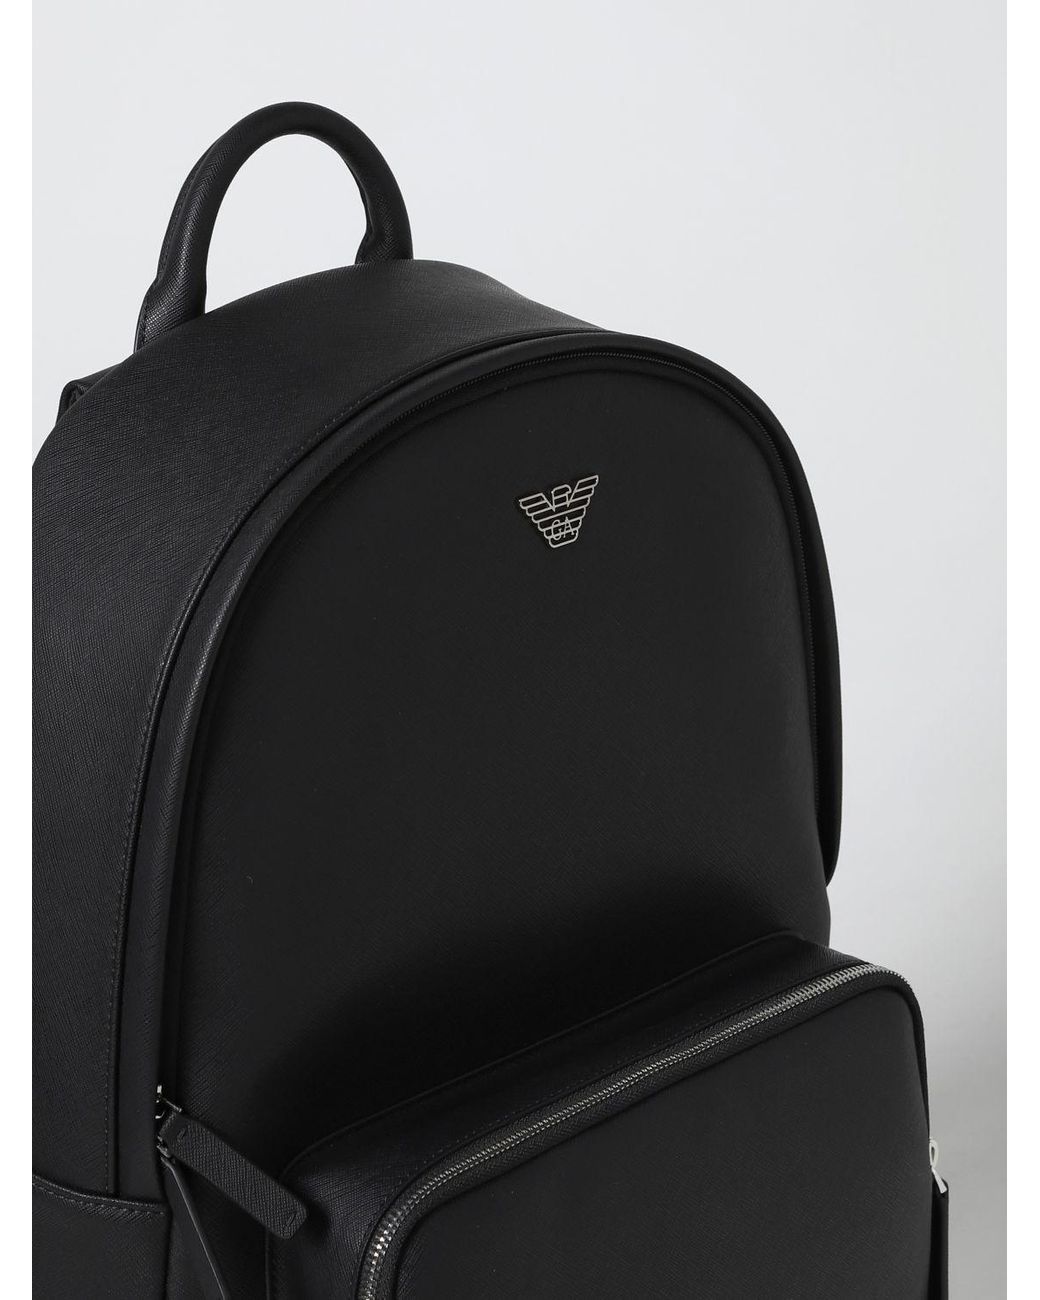 Emporio Armani Backpack in Black for Men | Lyst